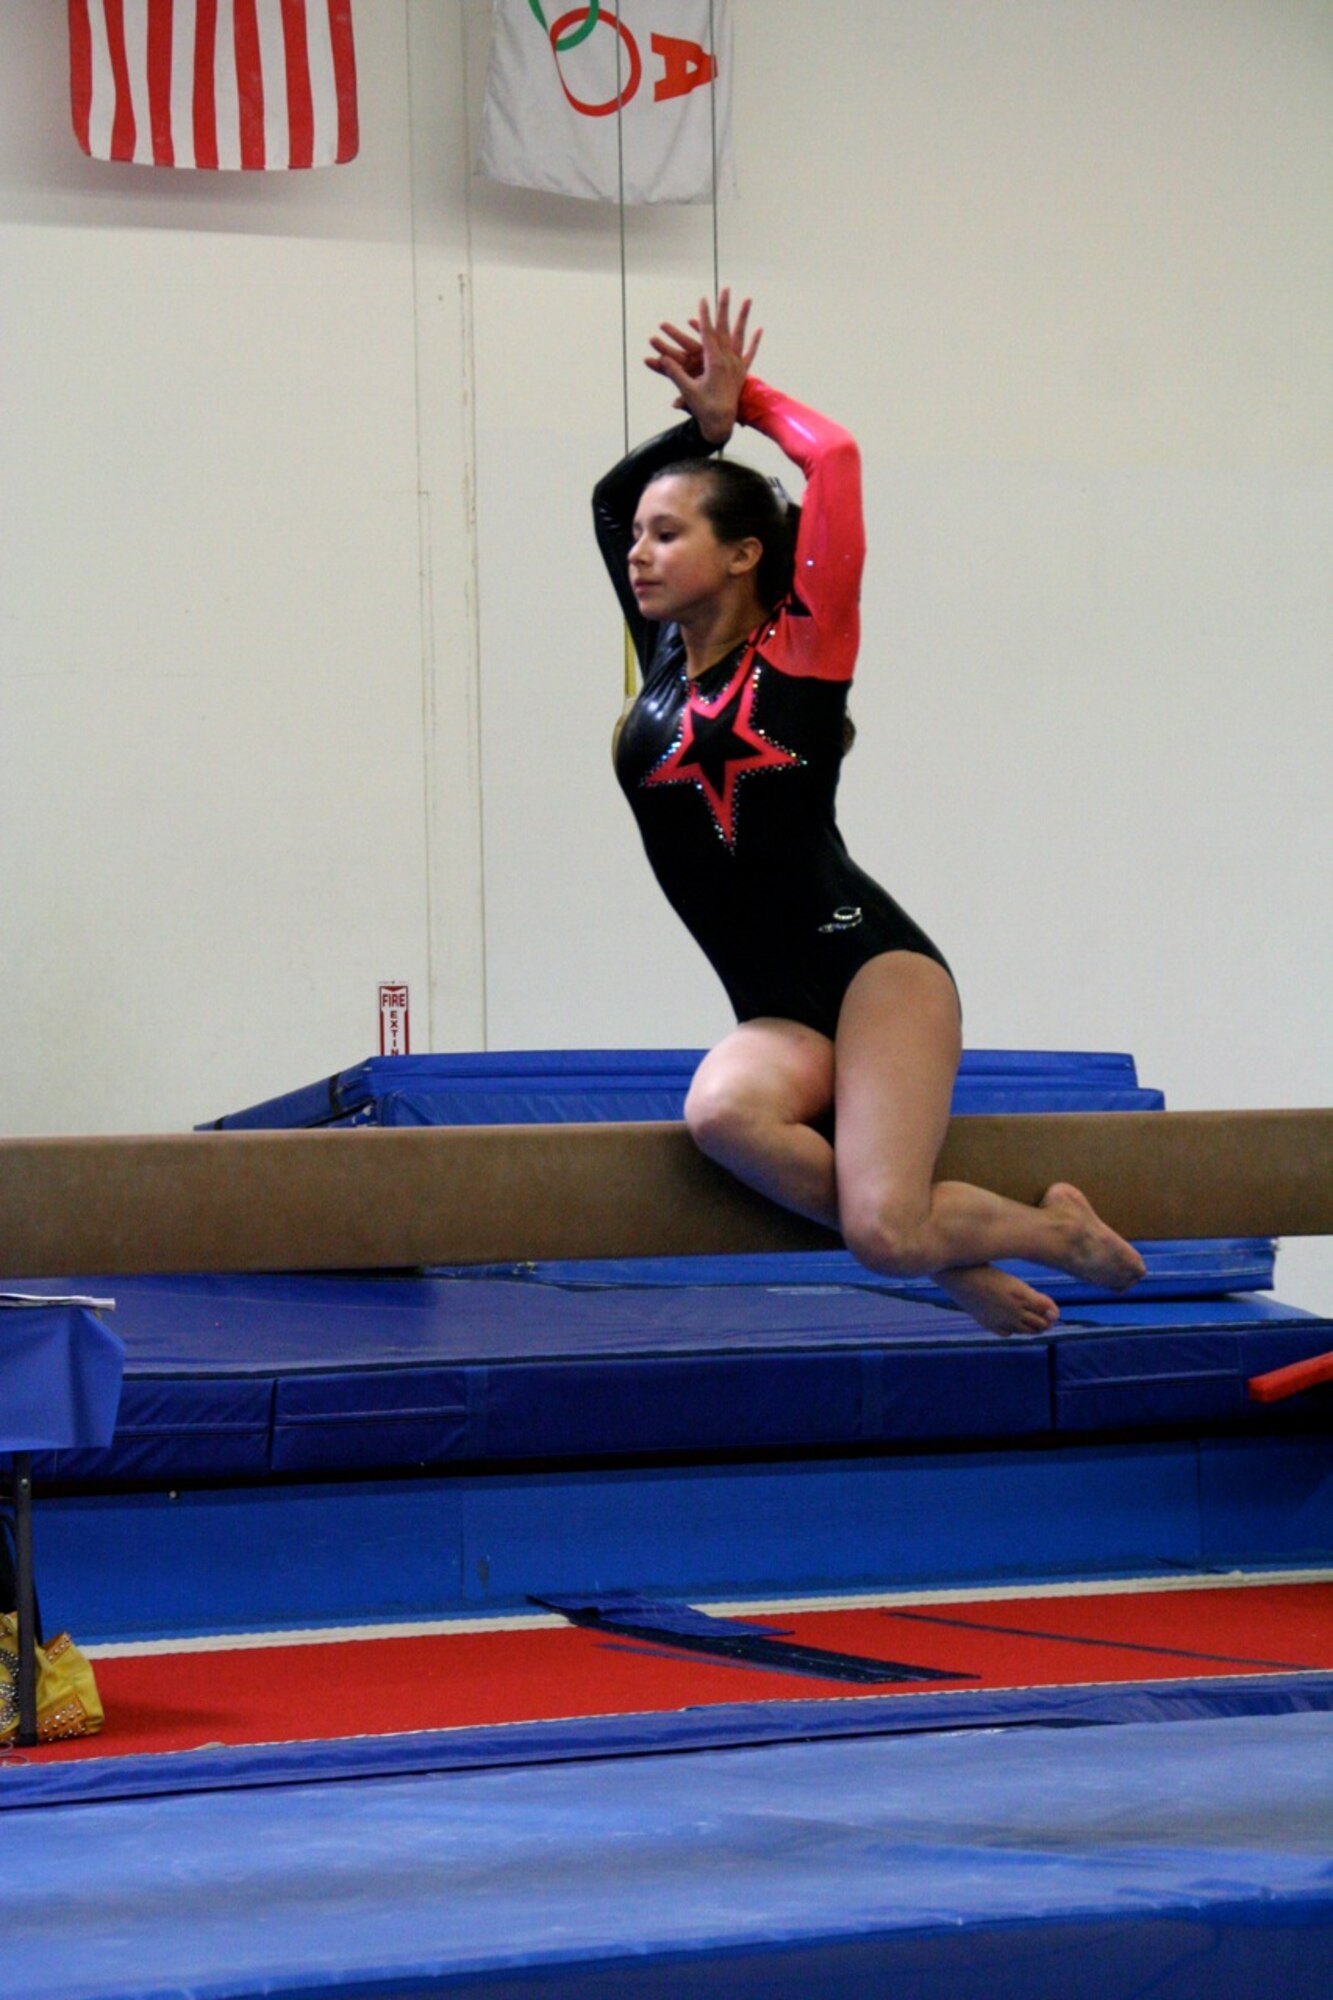 CAMARILLO, Calif. -- Genevieve Aguilar, age 14, begins her balance beam routine at the Snowflake Classic gymnastics competition here Feb. 7. Aguilar, who is with the Vandenberg Youth Programs Jets girls gymnastics Level 7 team, placed third for her routine at the competition. (Photo by Cheryl Castellenos)